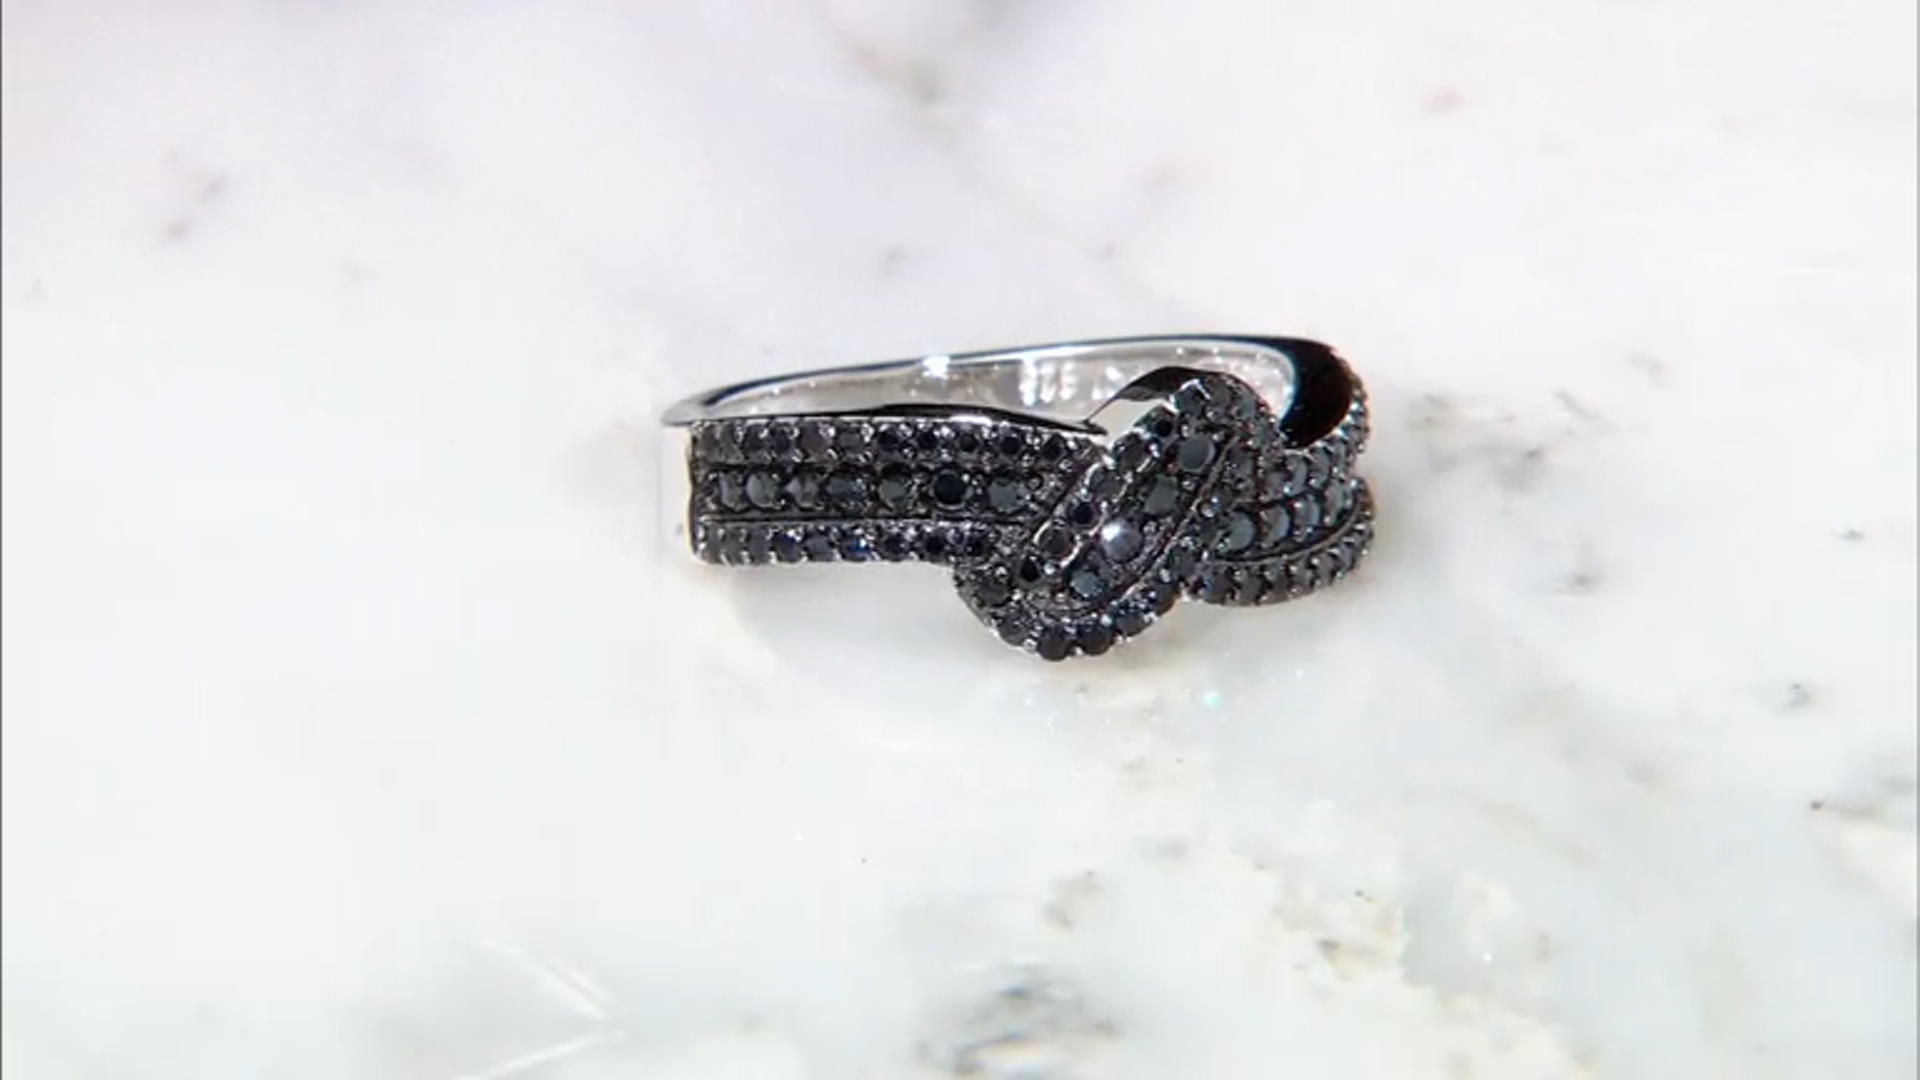 Black Spinel Rhodium Over Sterling Silver Ring .76ctw Video Thumbnail